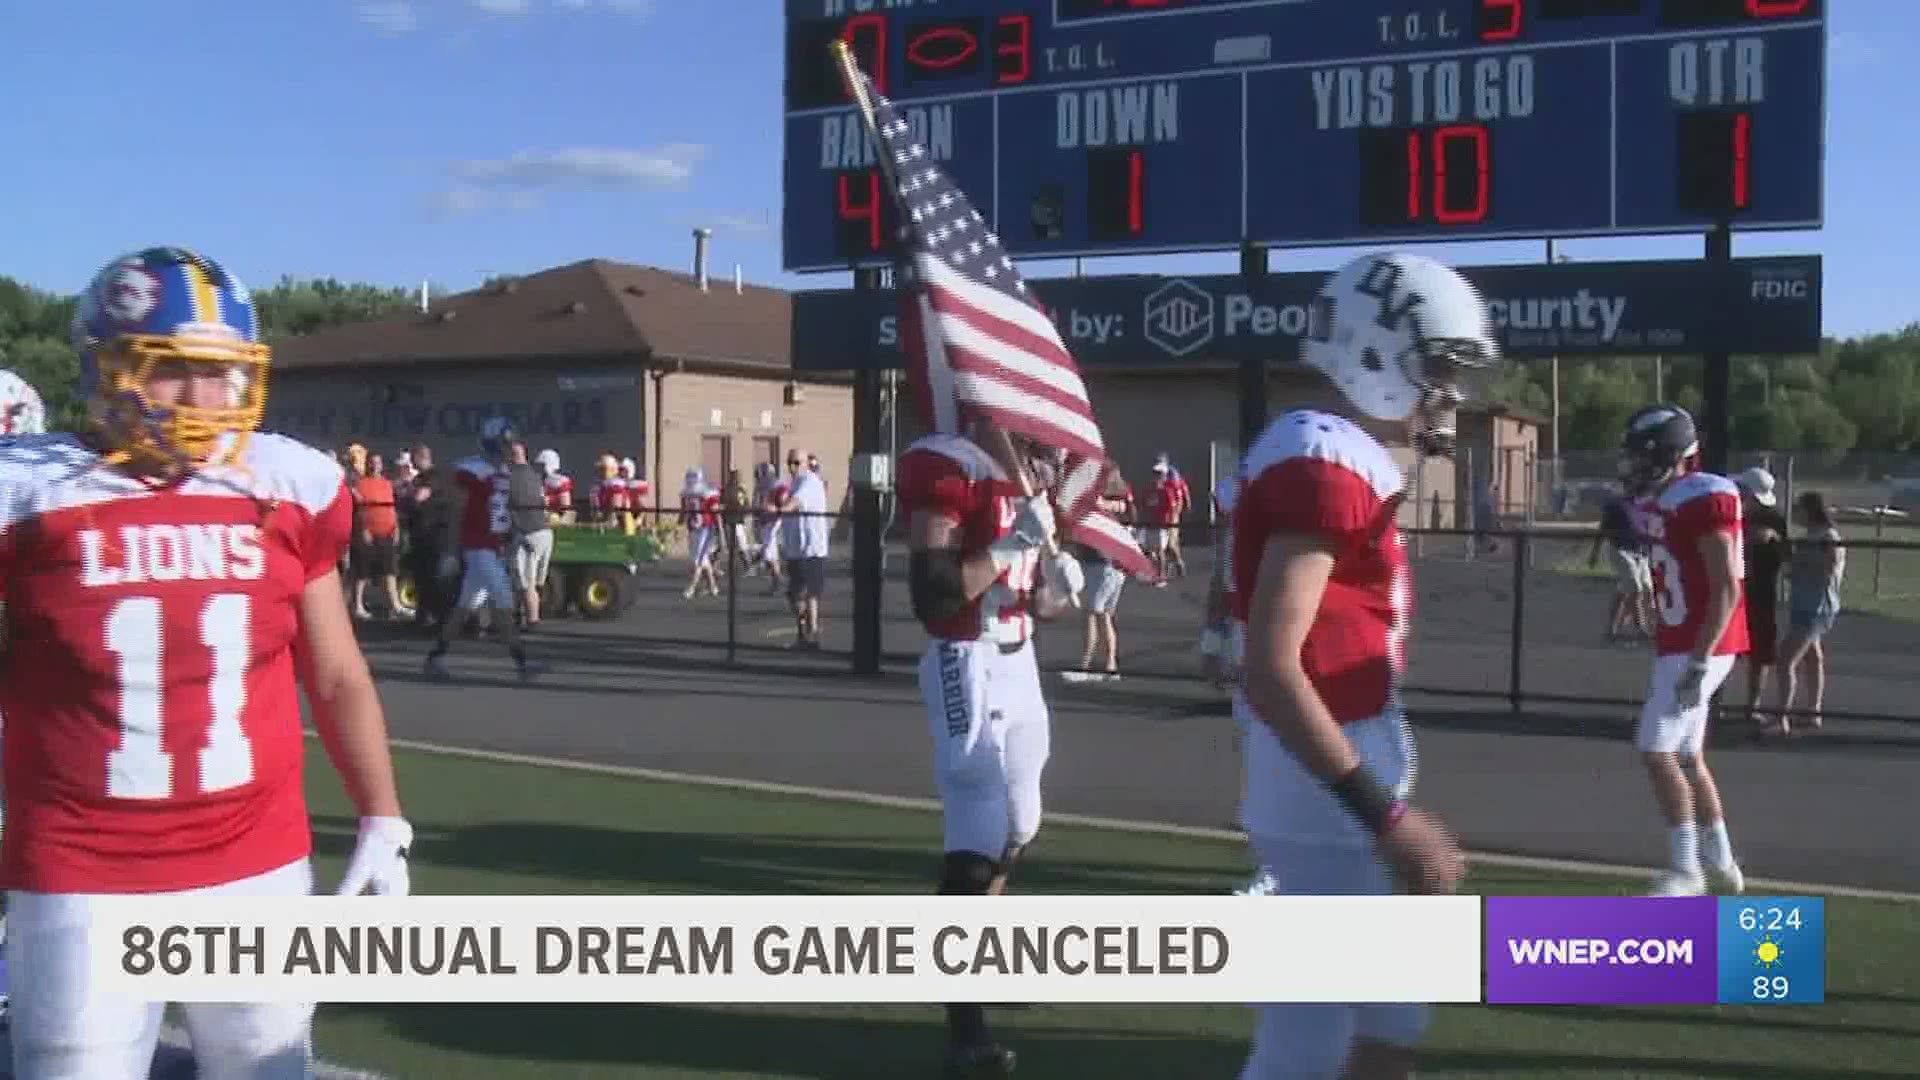 Dream Game canceled after 86 seasons without interruption.